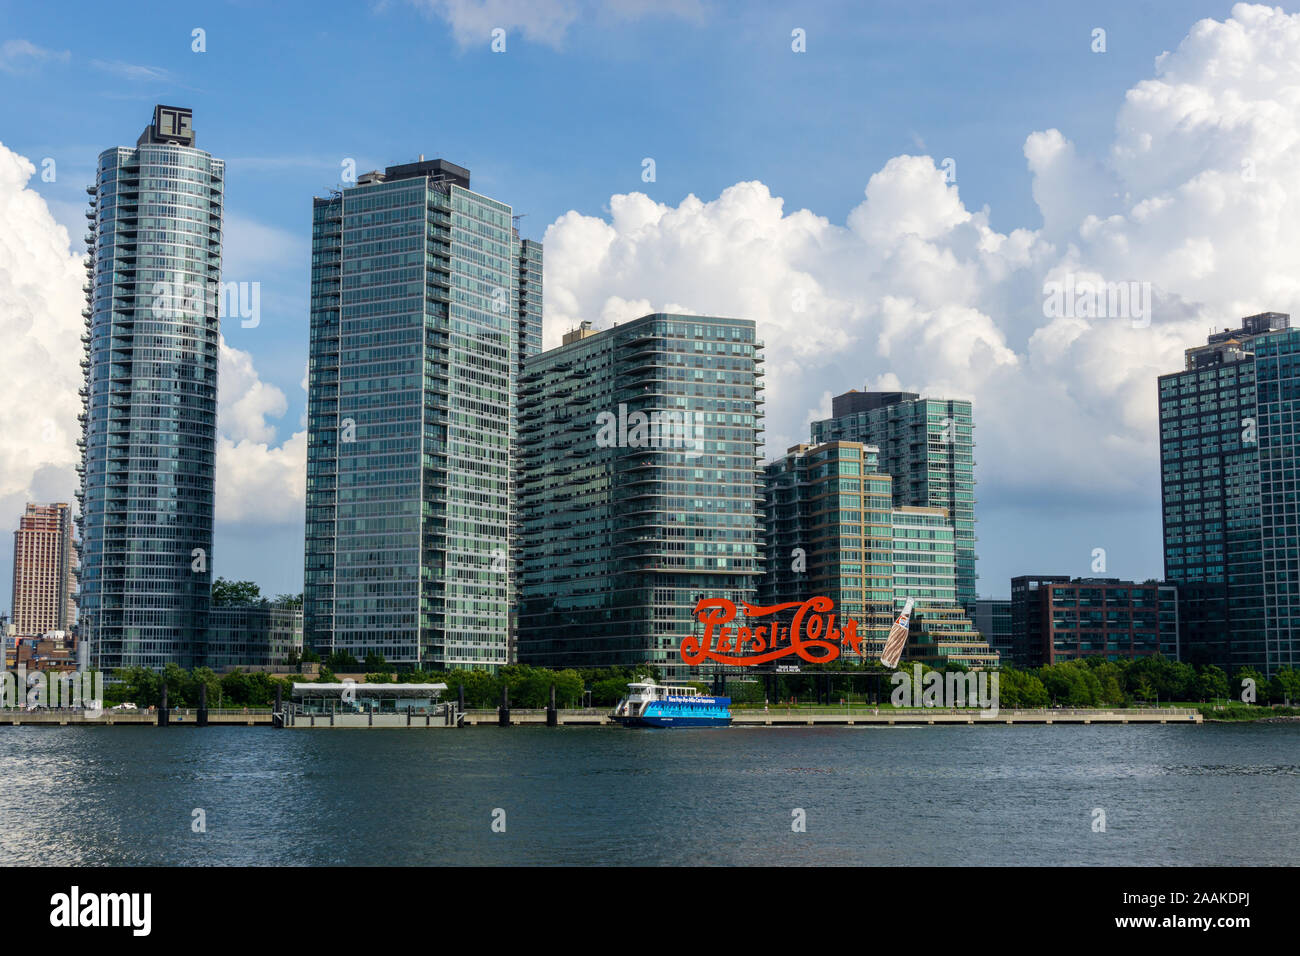 New York, USA - August 20, 2018: Long Island City waterfront with landmark Pepsi Cola sign located at Gantry Plaza State Park in Queens Stock Photo